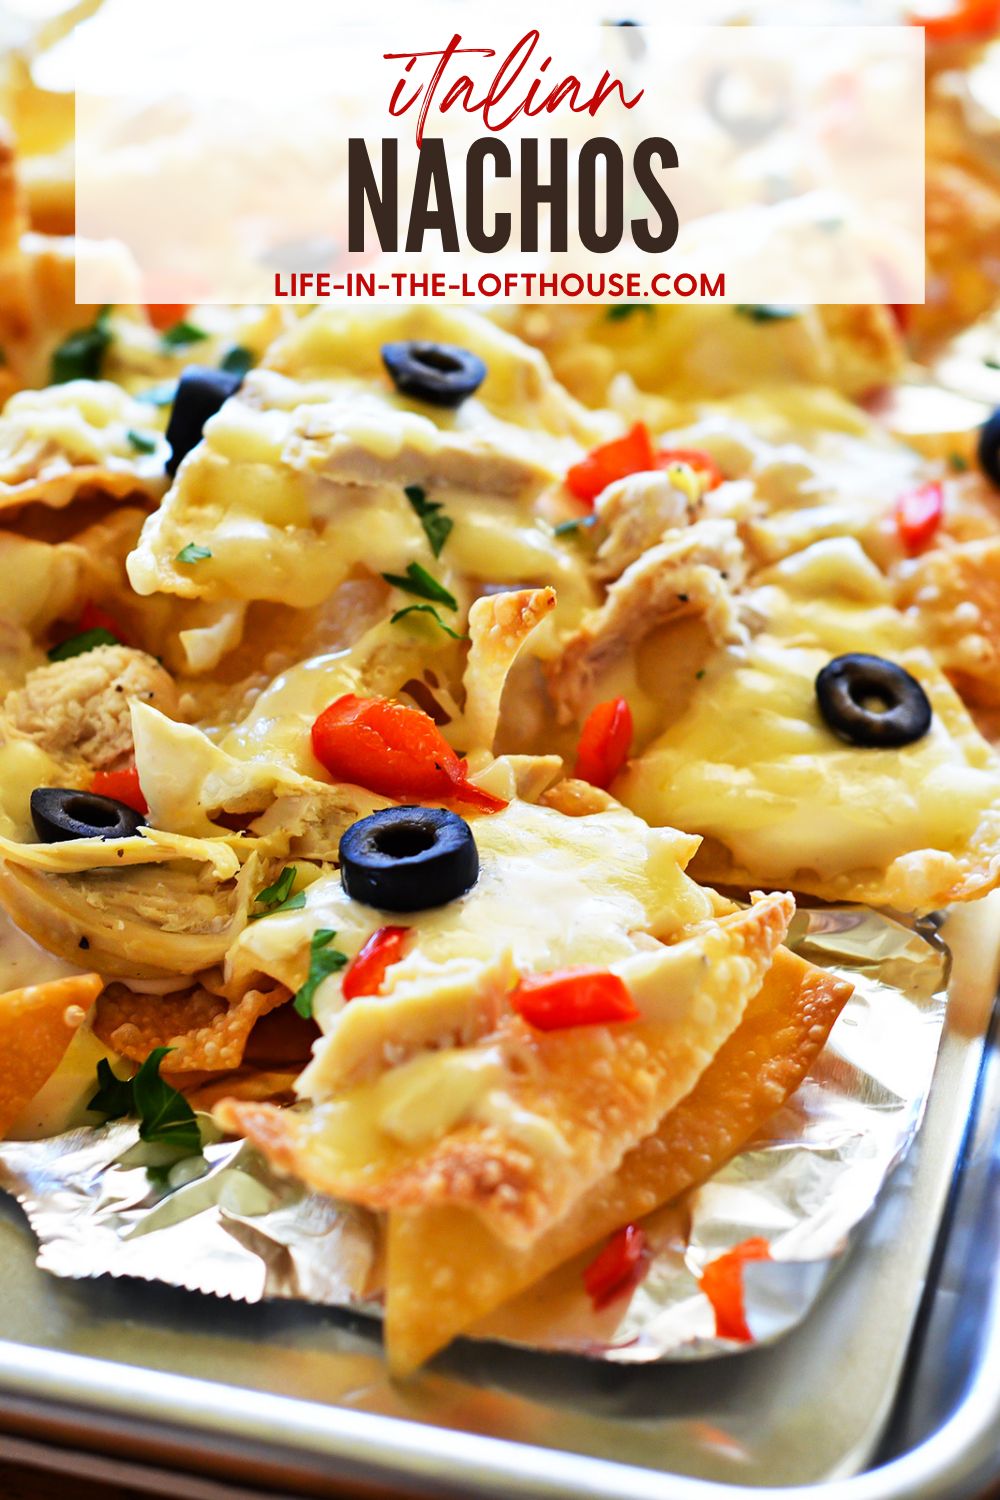 These Italian nachos are made with crispy wontons, shredded chicken, bell peppers, and olives smothered in Alfredo sauce and cheese. Life-in-the-Lofthouse.com